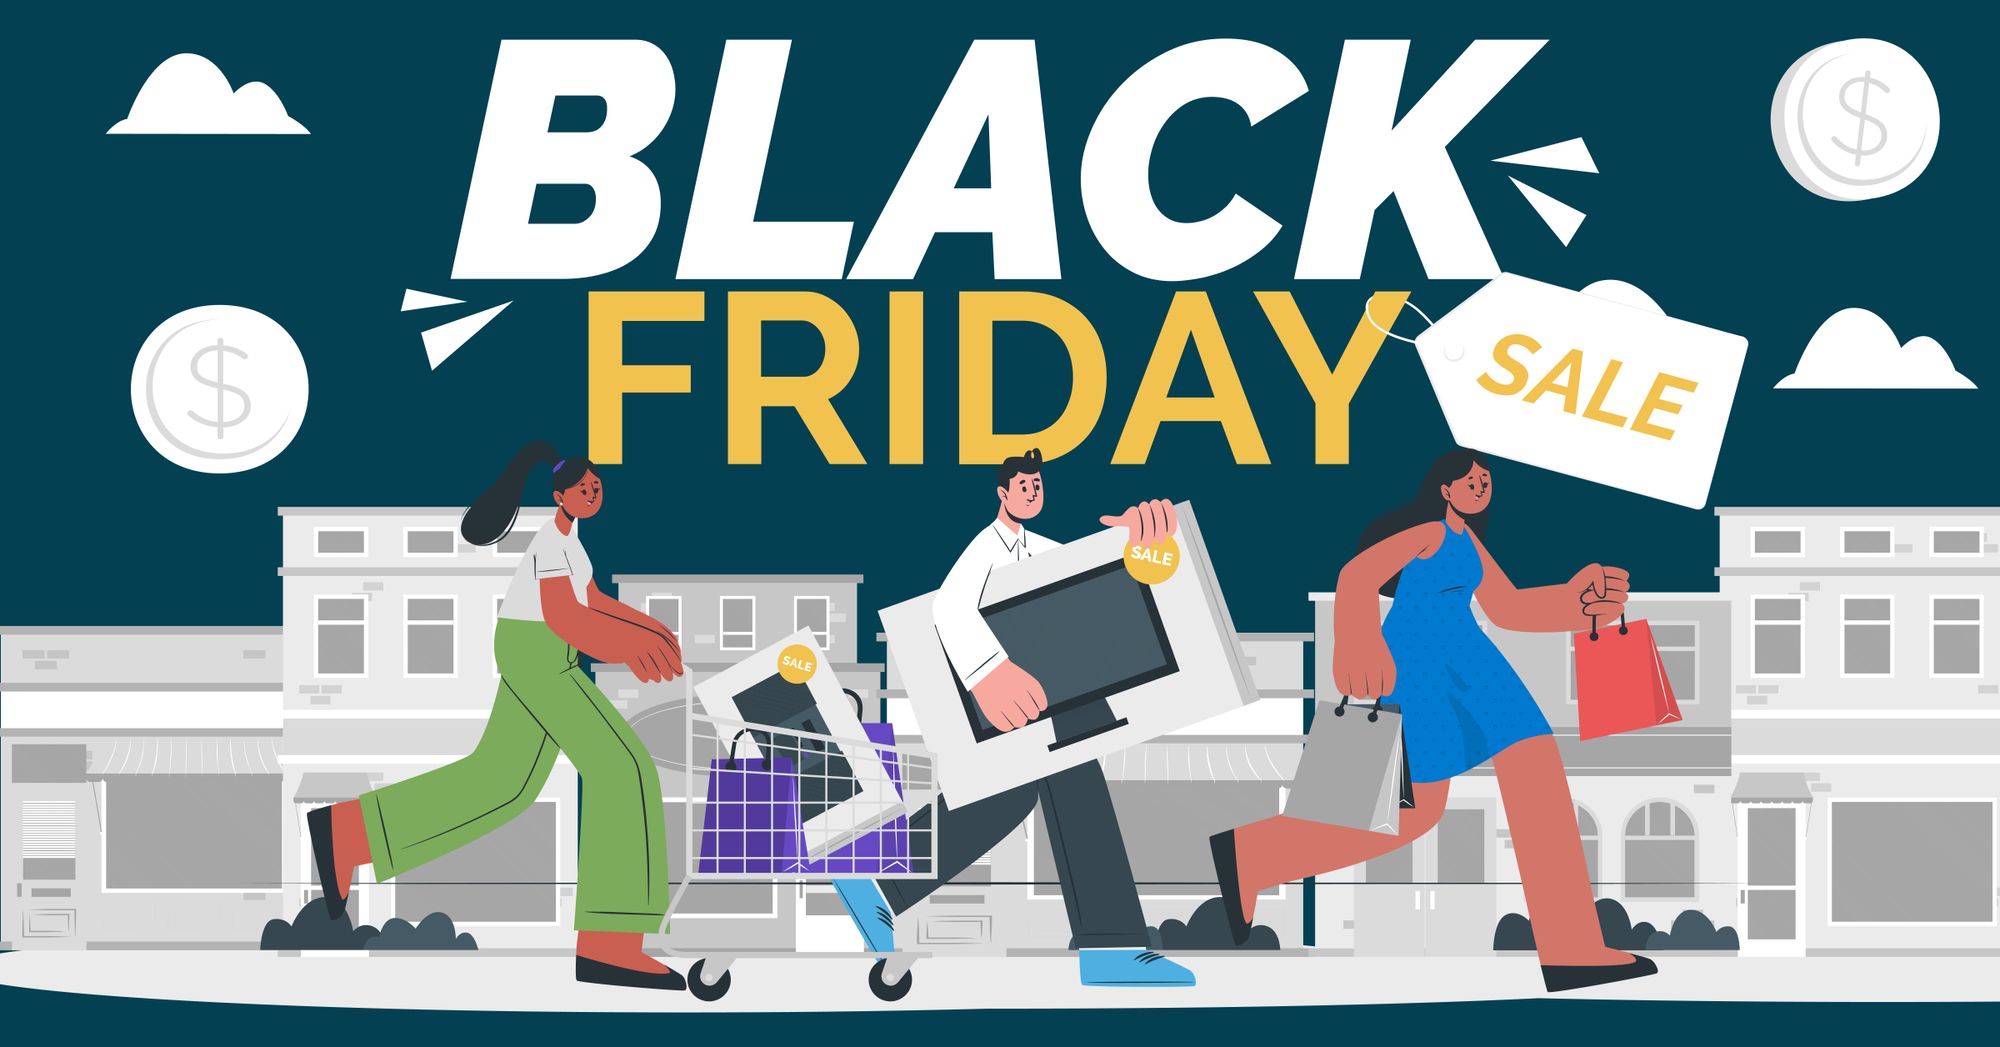 Black Friday 2021: 15 Best Things To Buy & 10 Worst Things To Buy